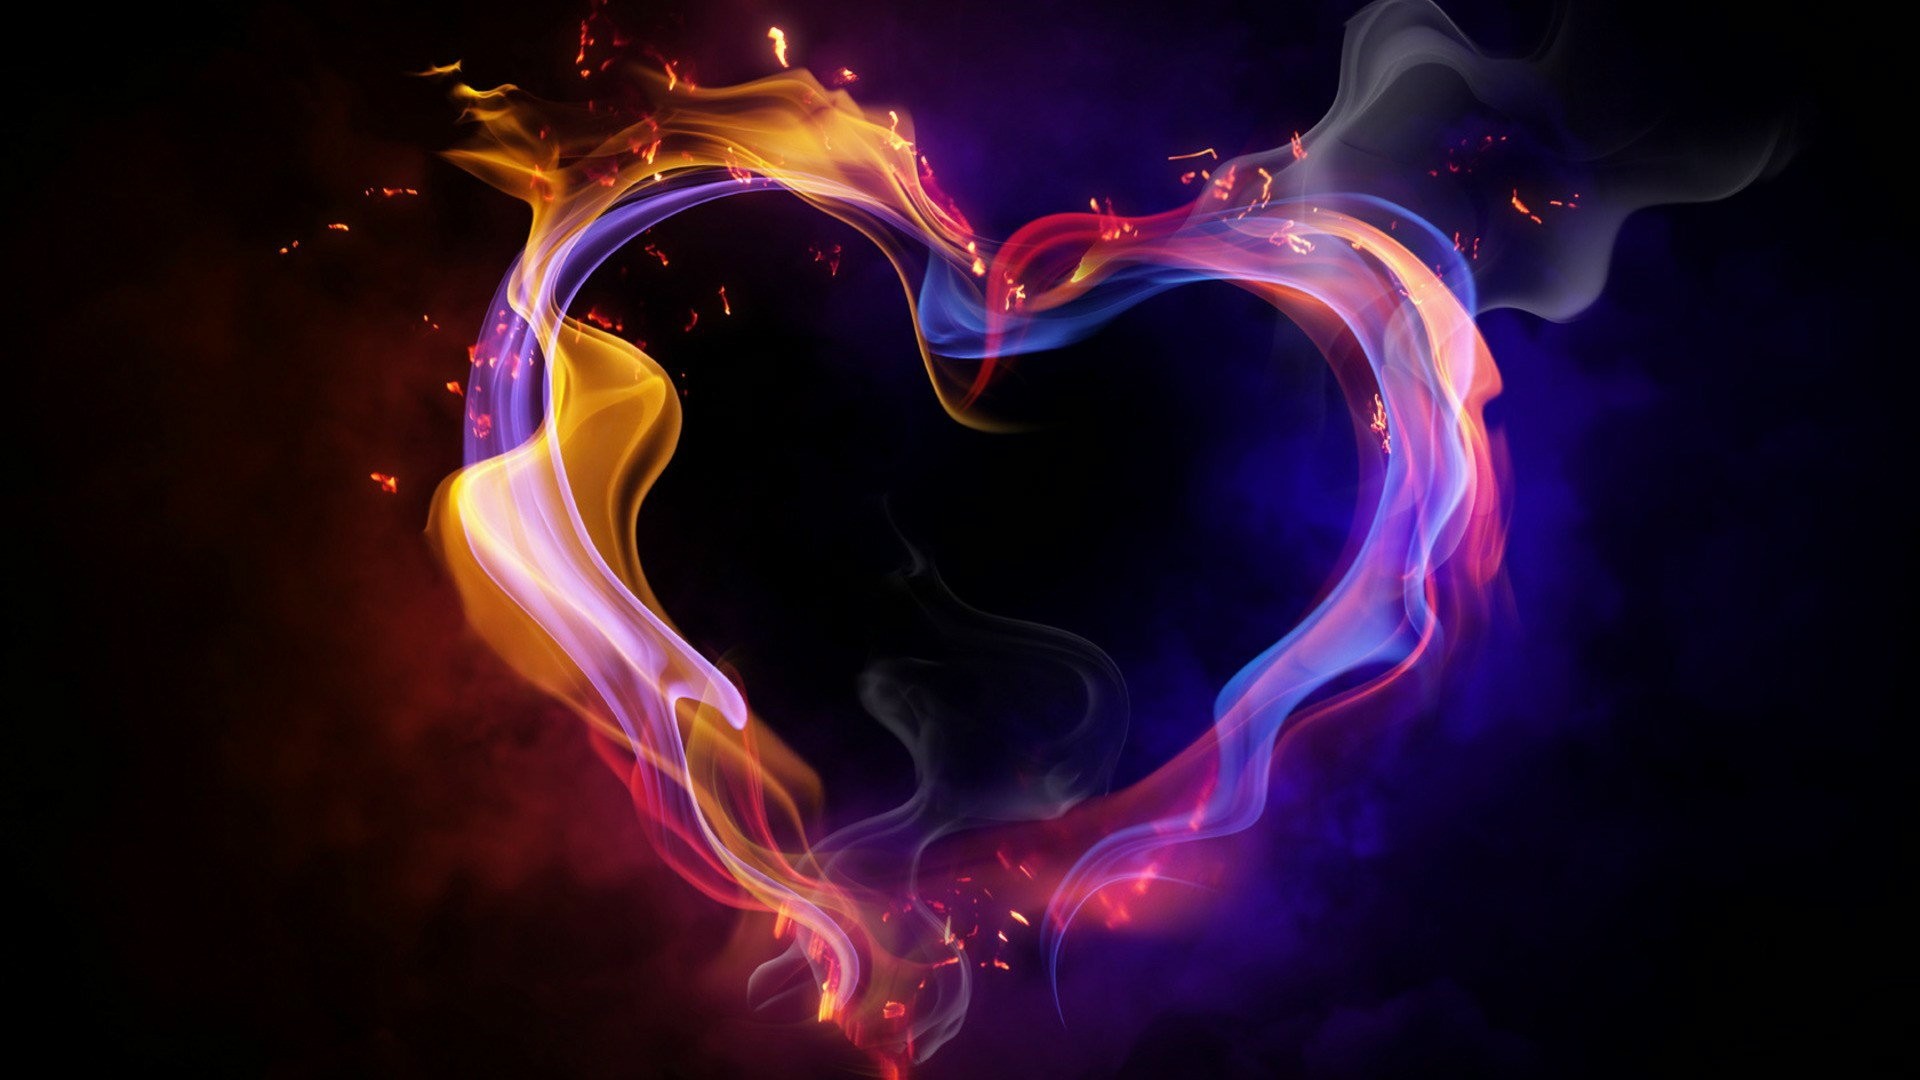 1920x1080 Hd  Cool Color Abstract Heart Desktop Wallpapers Backgrounds